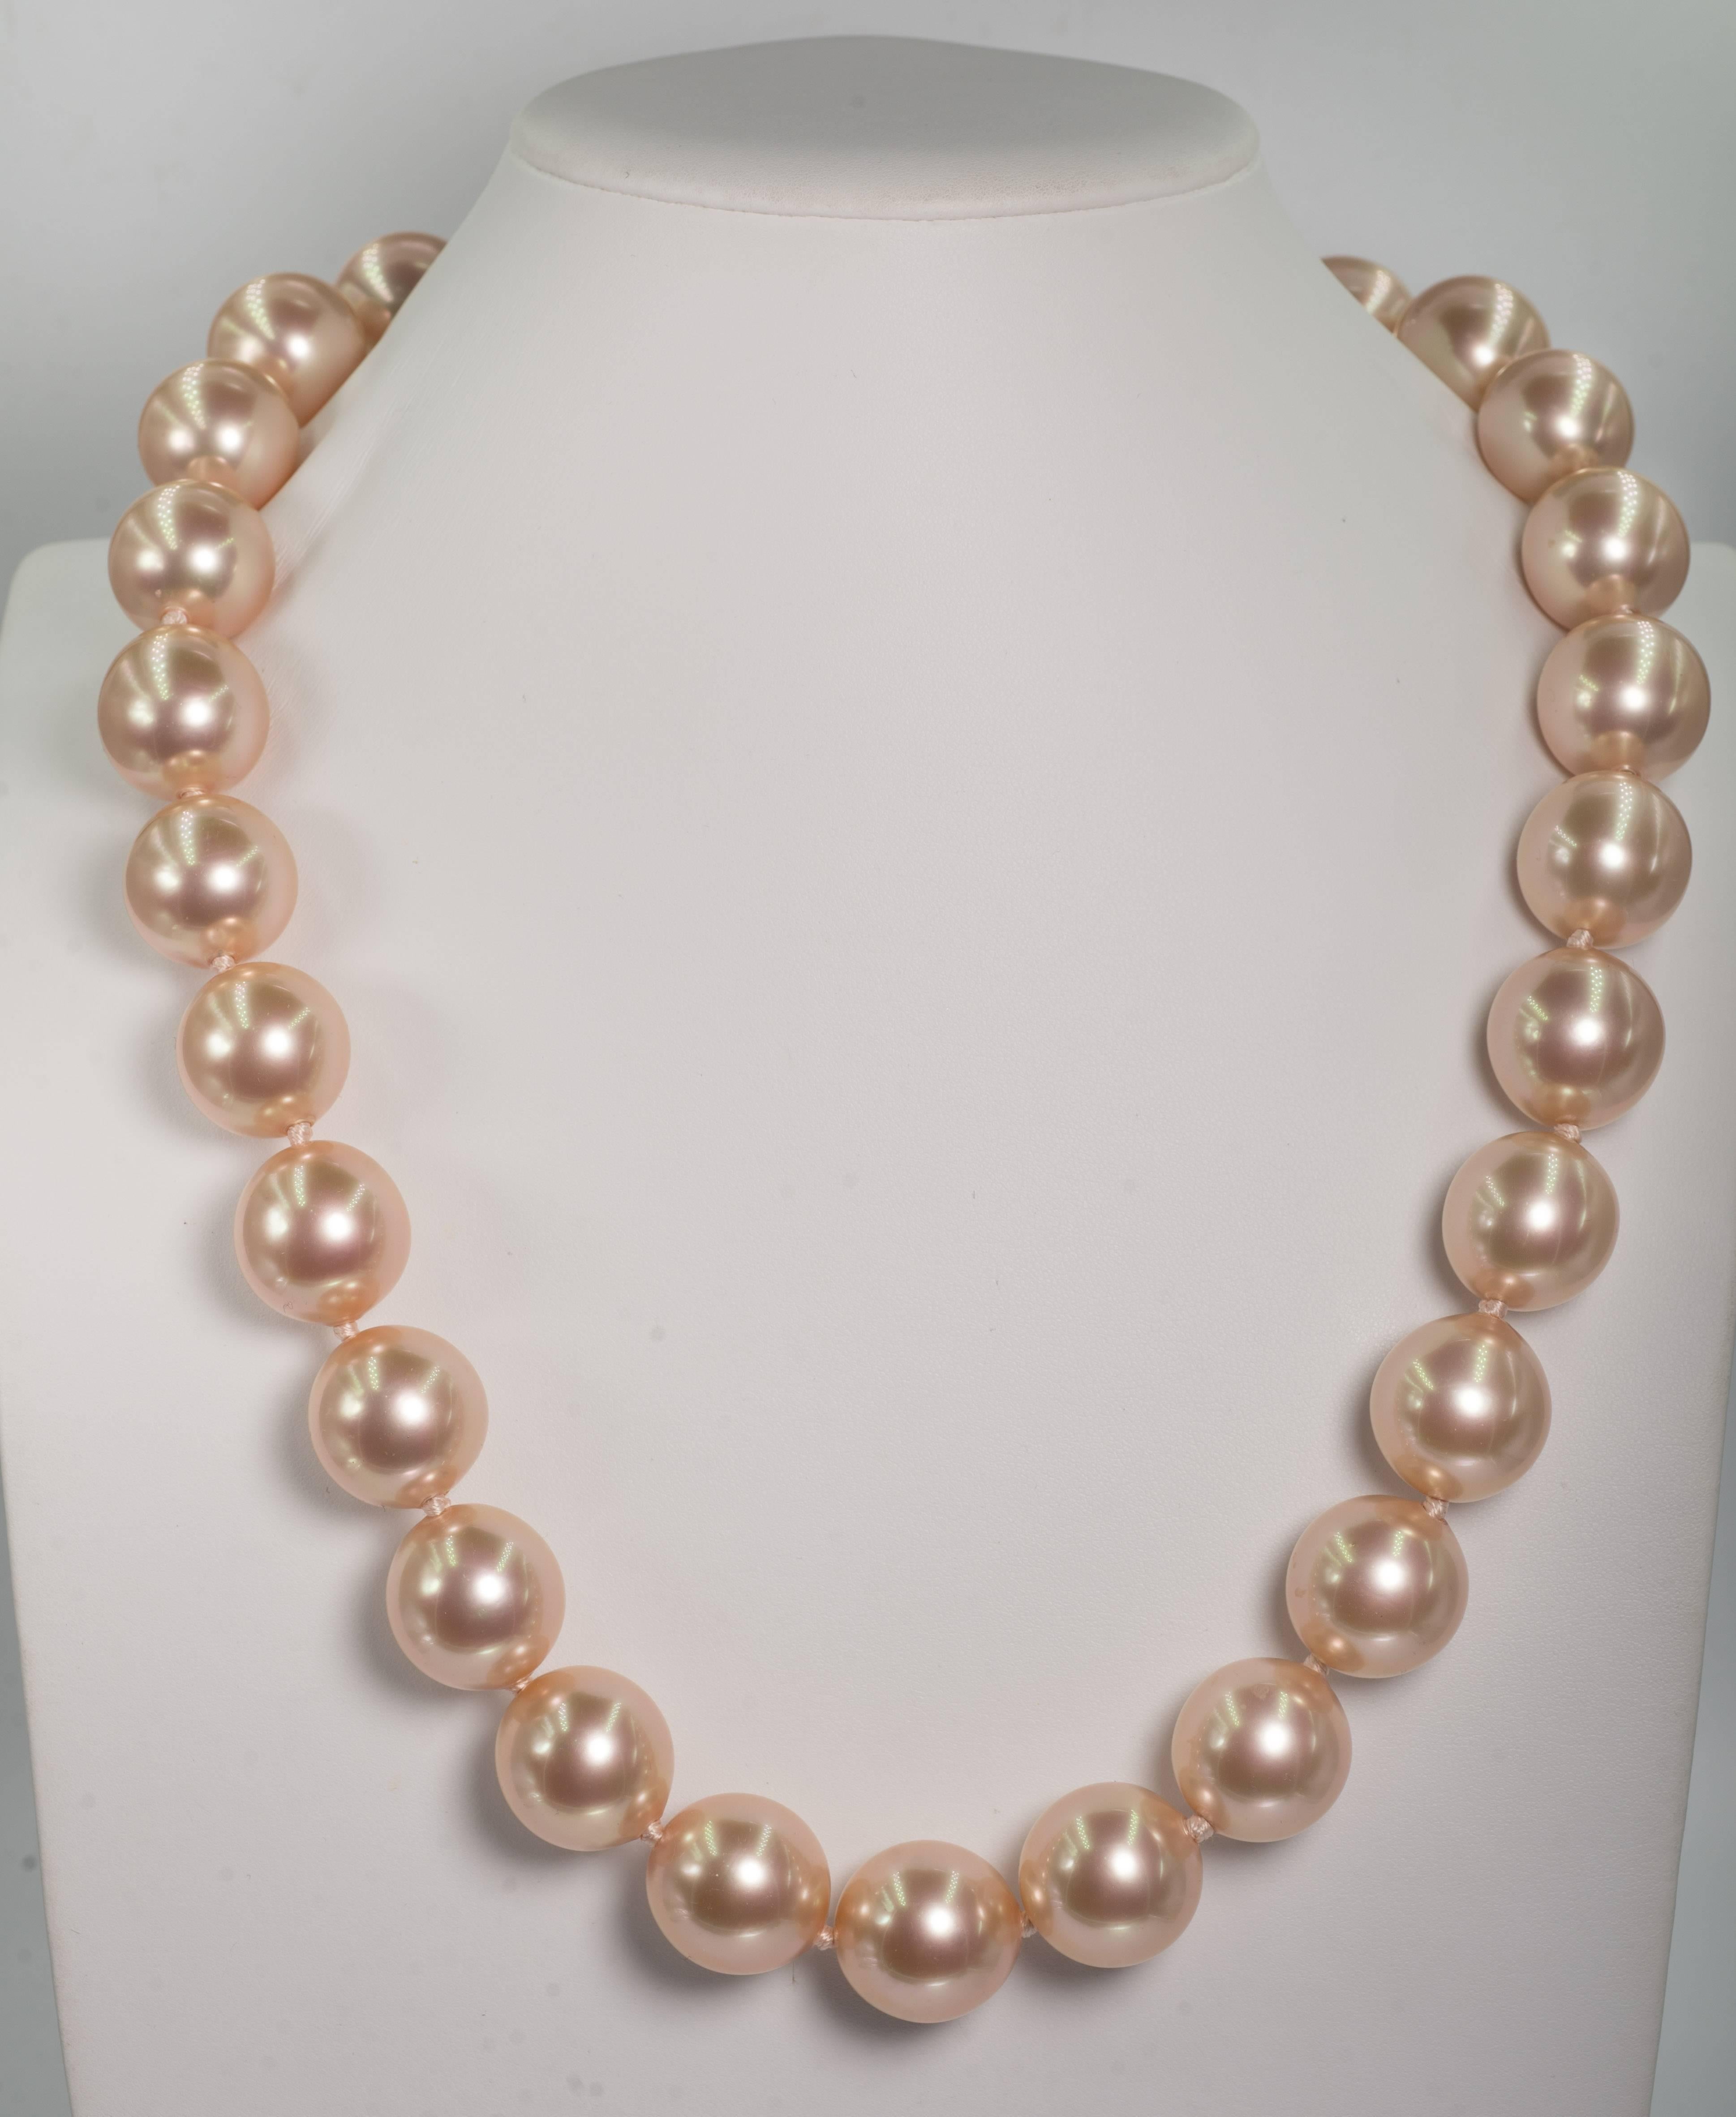 Stunning 26inch faux 20mm French Angel Skin Pink Color handmade pearls by France's oldest faux pearl makers dating back to Napoleon lll. .The pearls are hand strung and knotted to a wonderful pave cubic zircon sterling clasp. These pearls are no